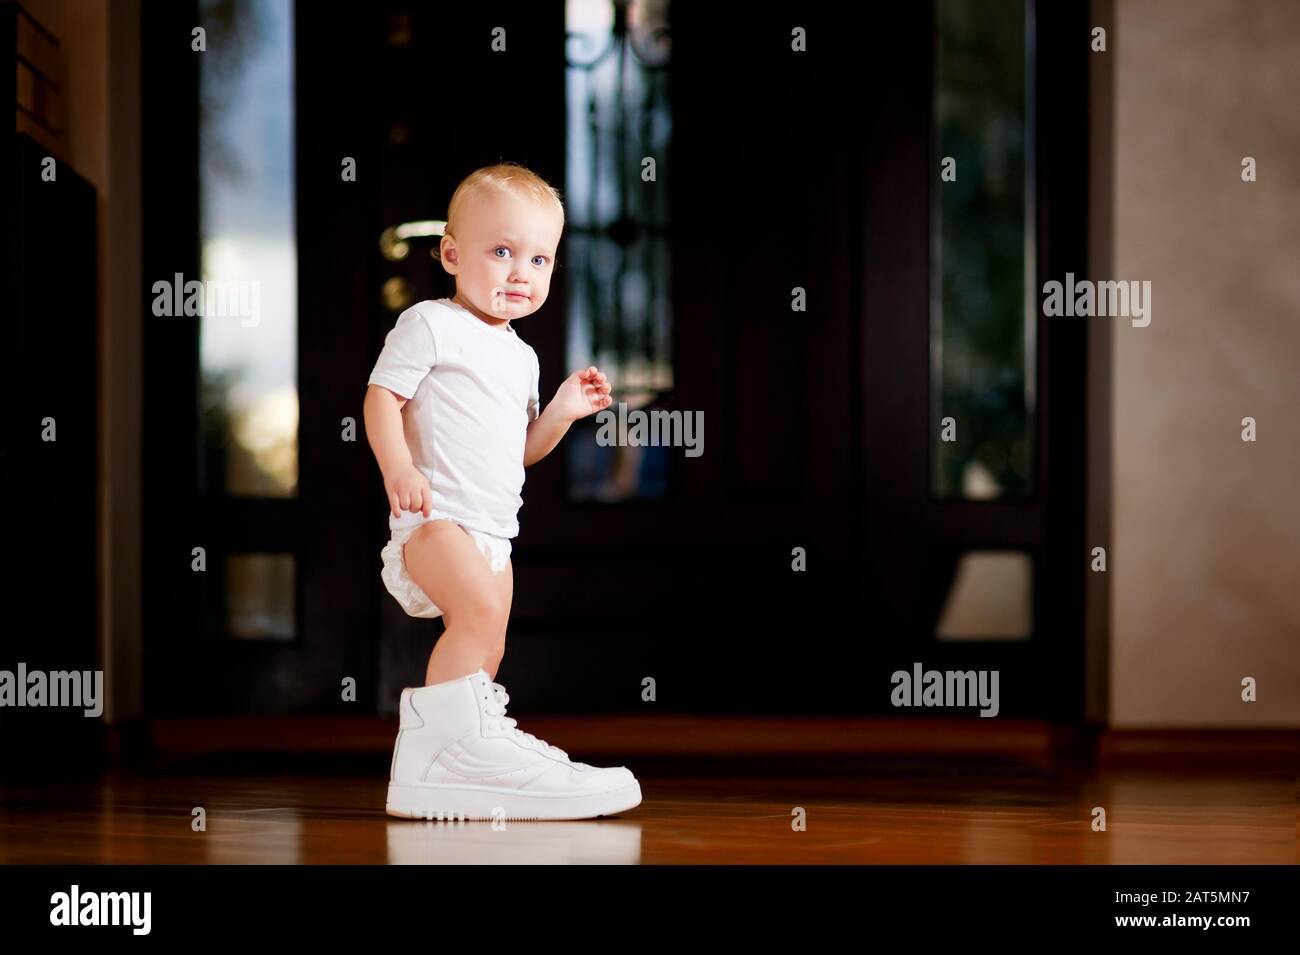 child put on adult white sneaker while standing in hallway Stock Photo